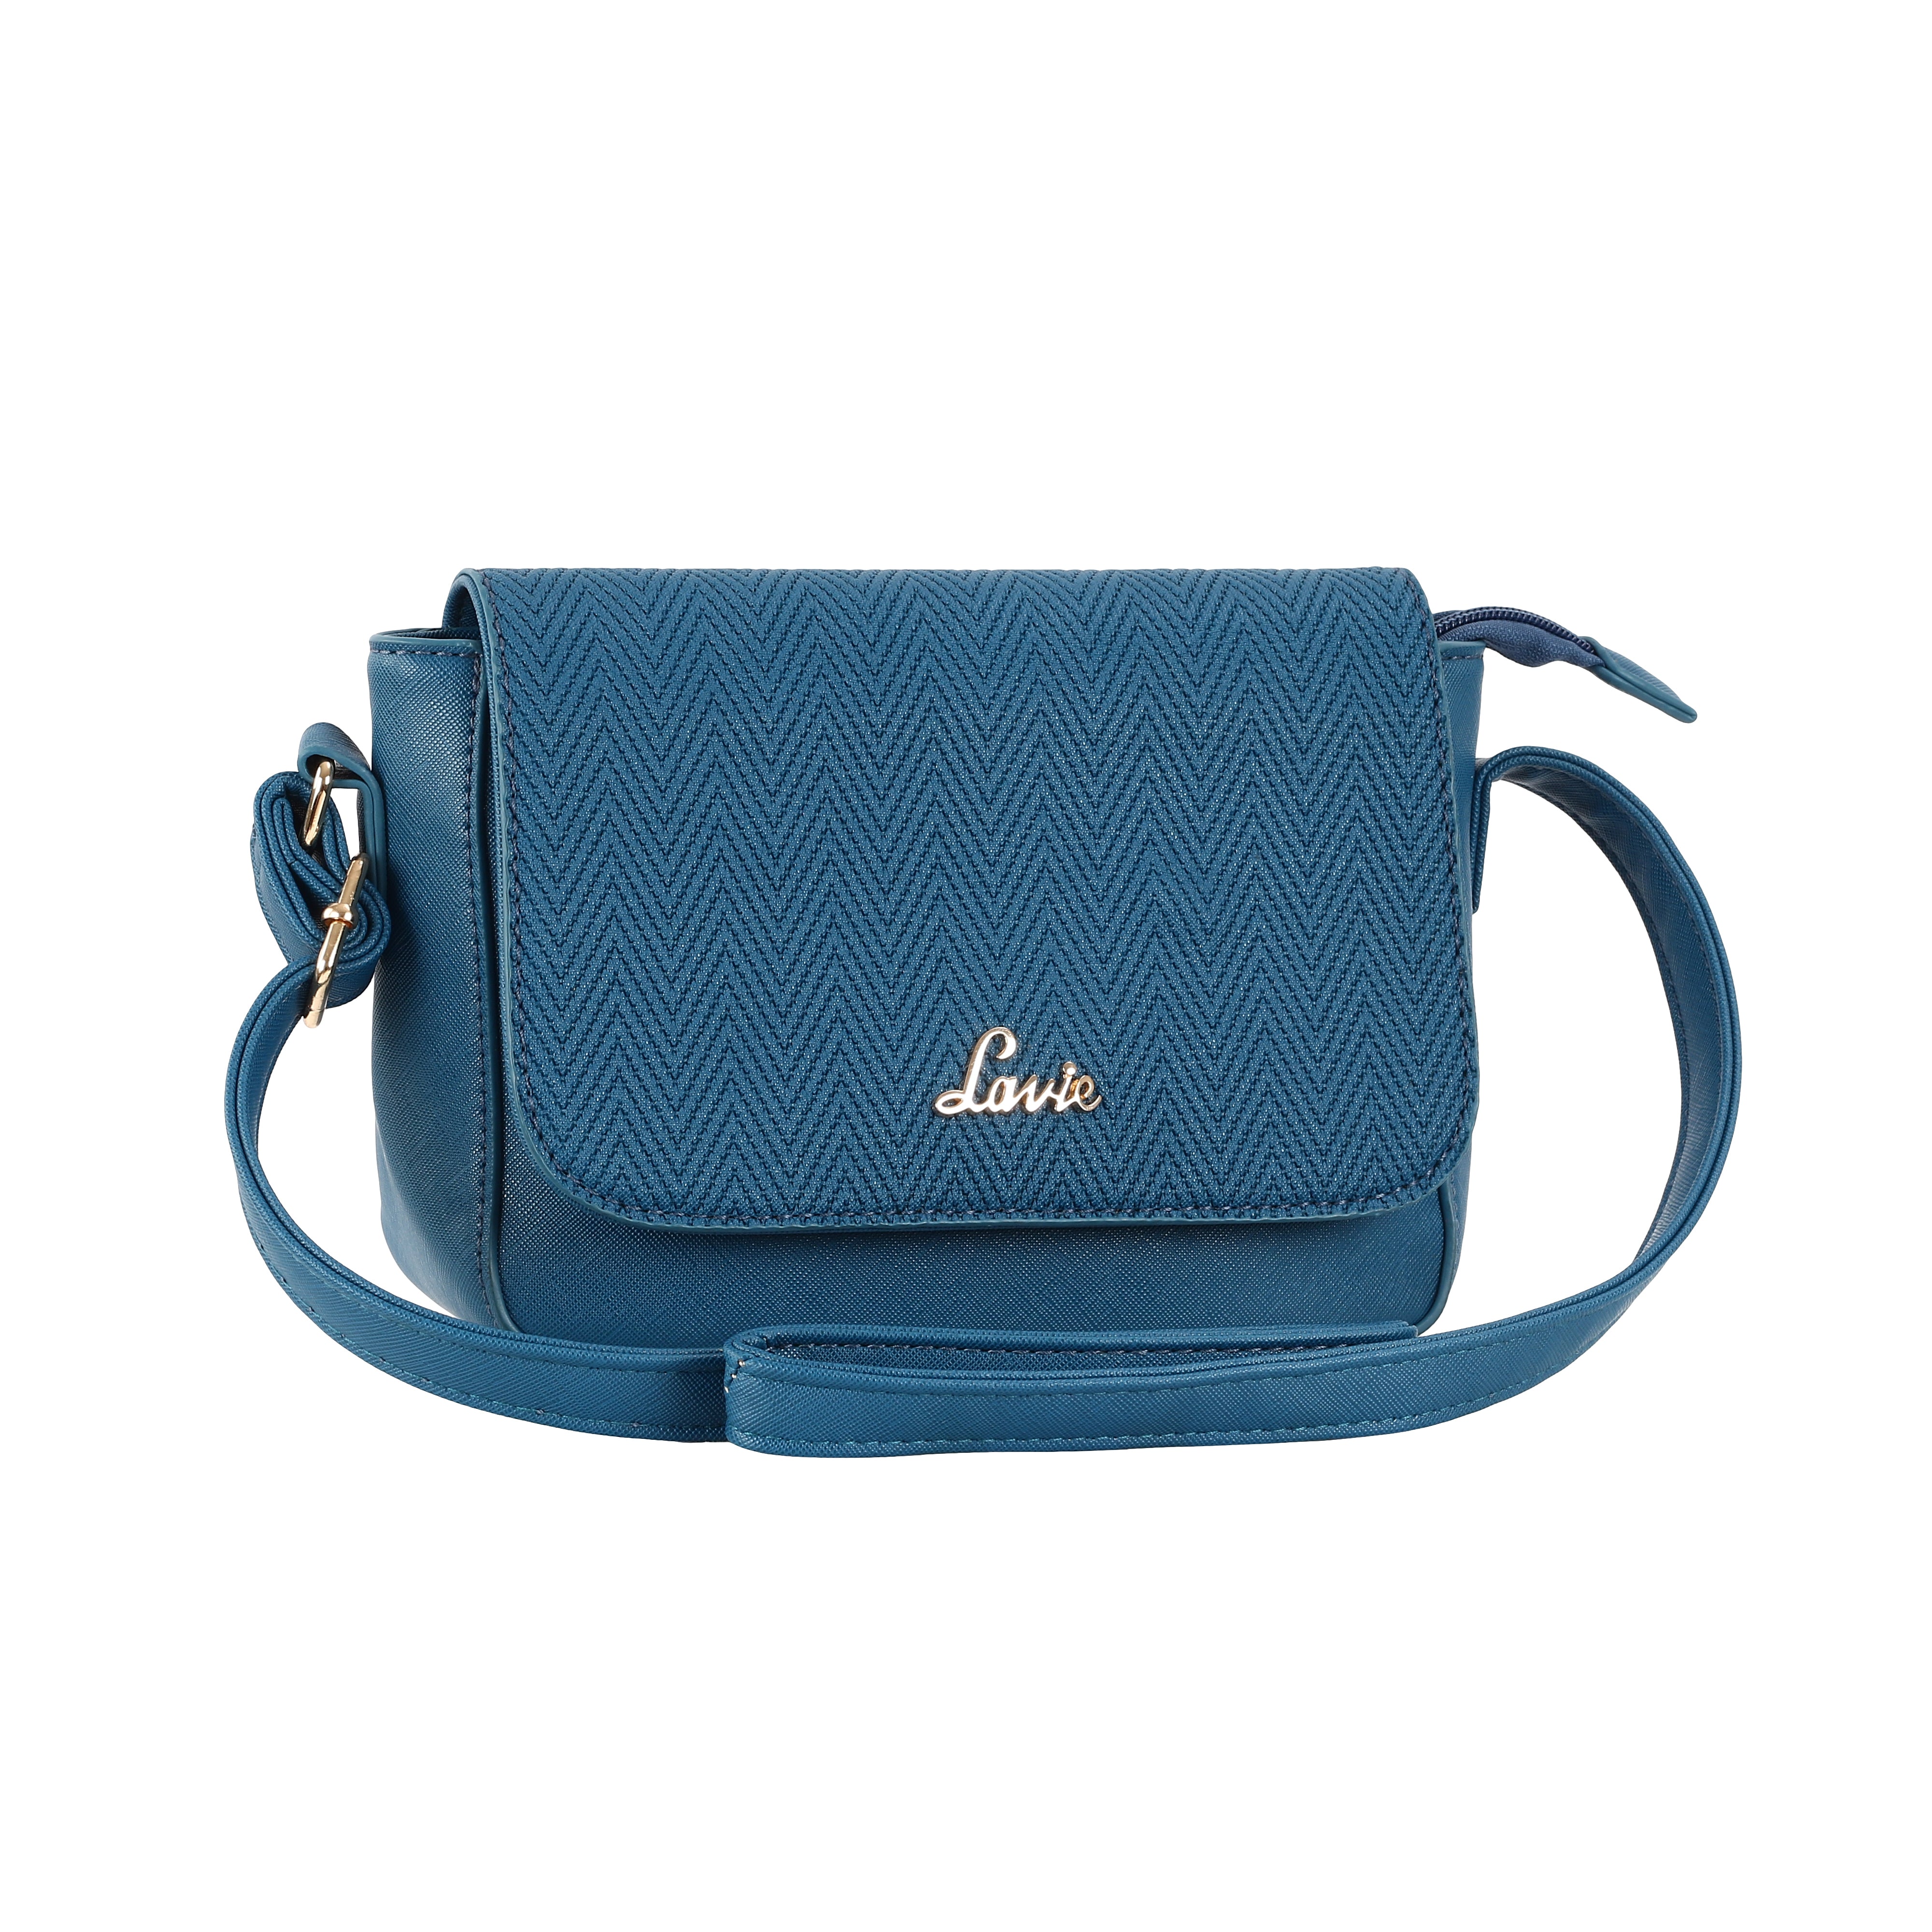 Luxury Genuine Leather Evening Tote Bag With Gold Cross Body Bag Straps For  Women By Designers Lavie Collection From Vivid695, $42.64 | DHgate.Com